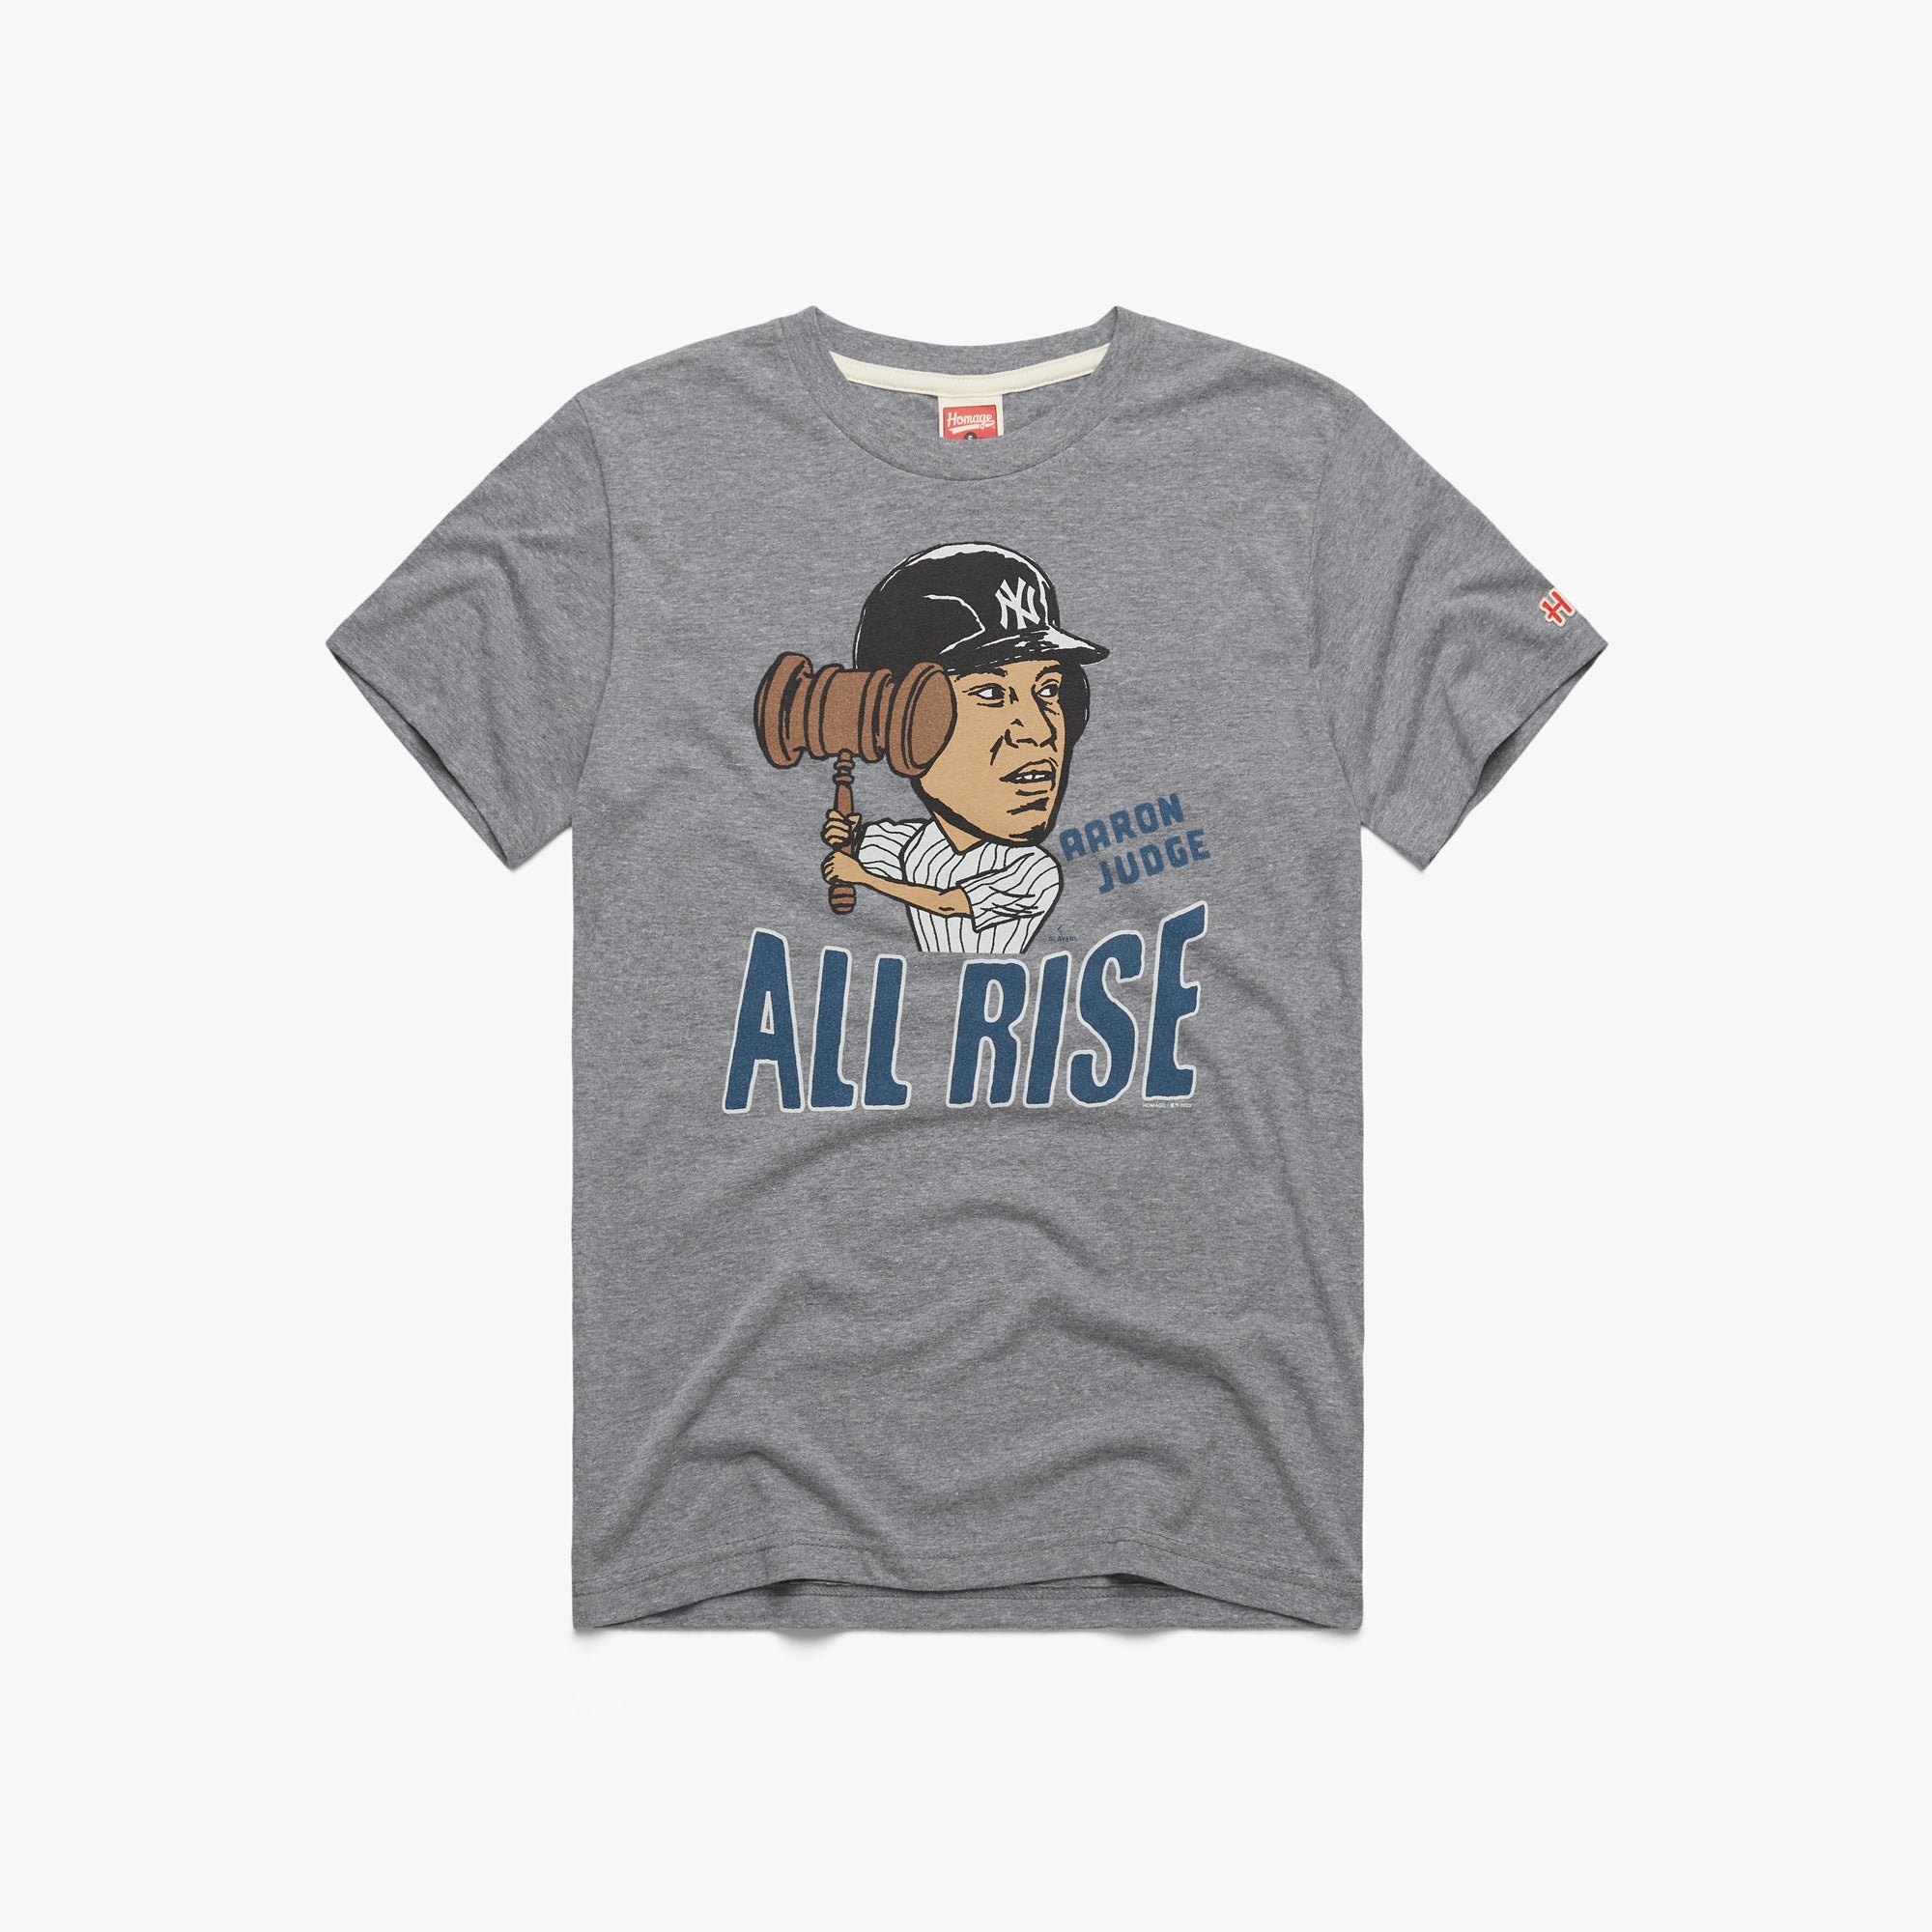 New Aaron Judge T-Shirt - Aaron Judge All Rise 62 Tee For Fan Size S-3XL